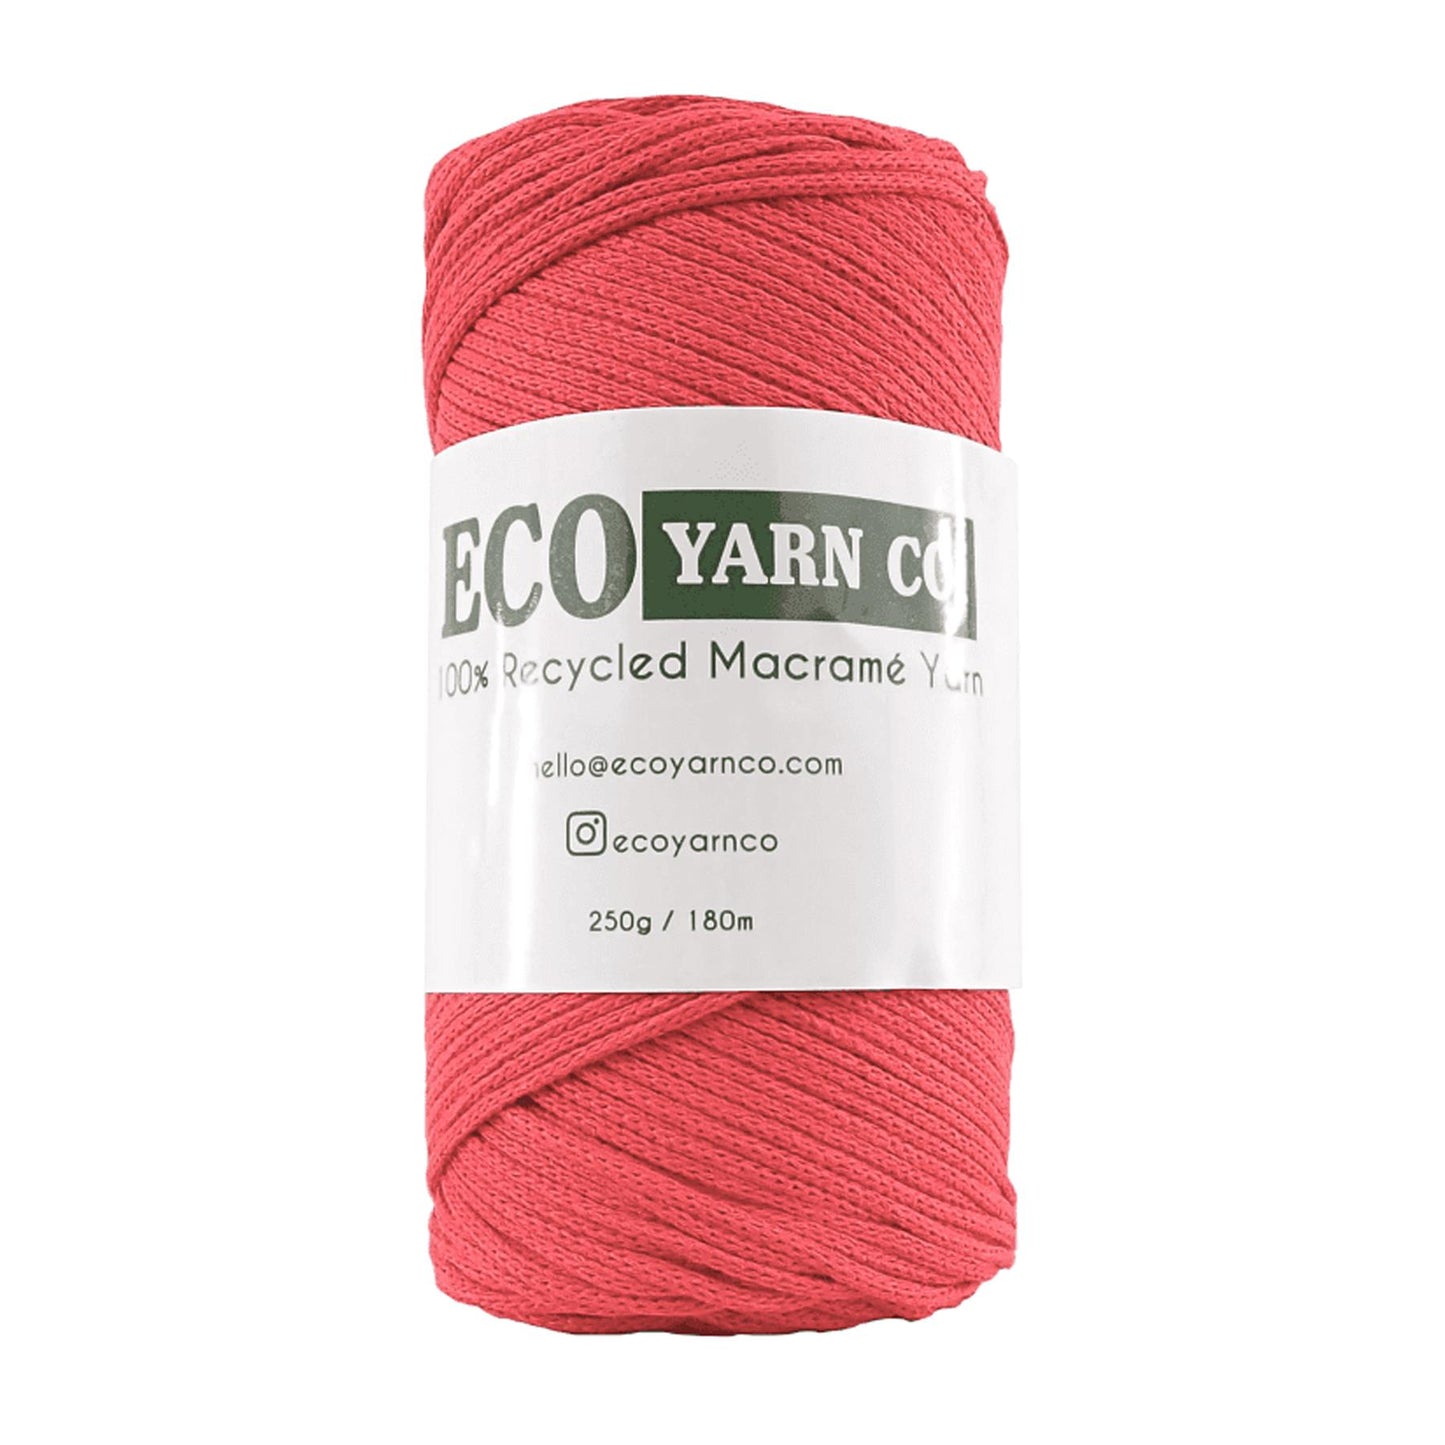 [Eco Yarn Co] Coral Red Cotton/Polyester Macrame Yarn - 180M, 250g